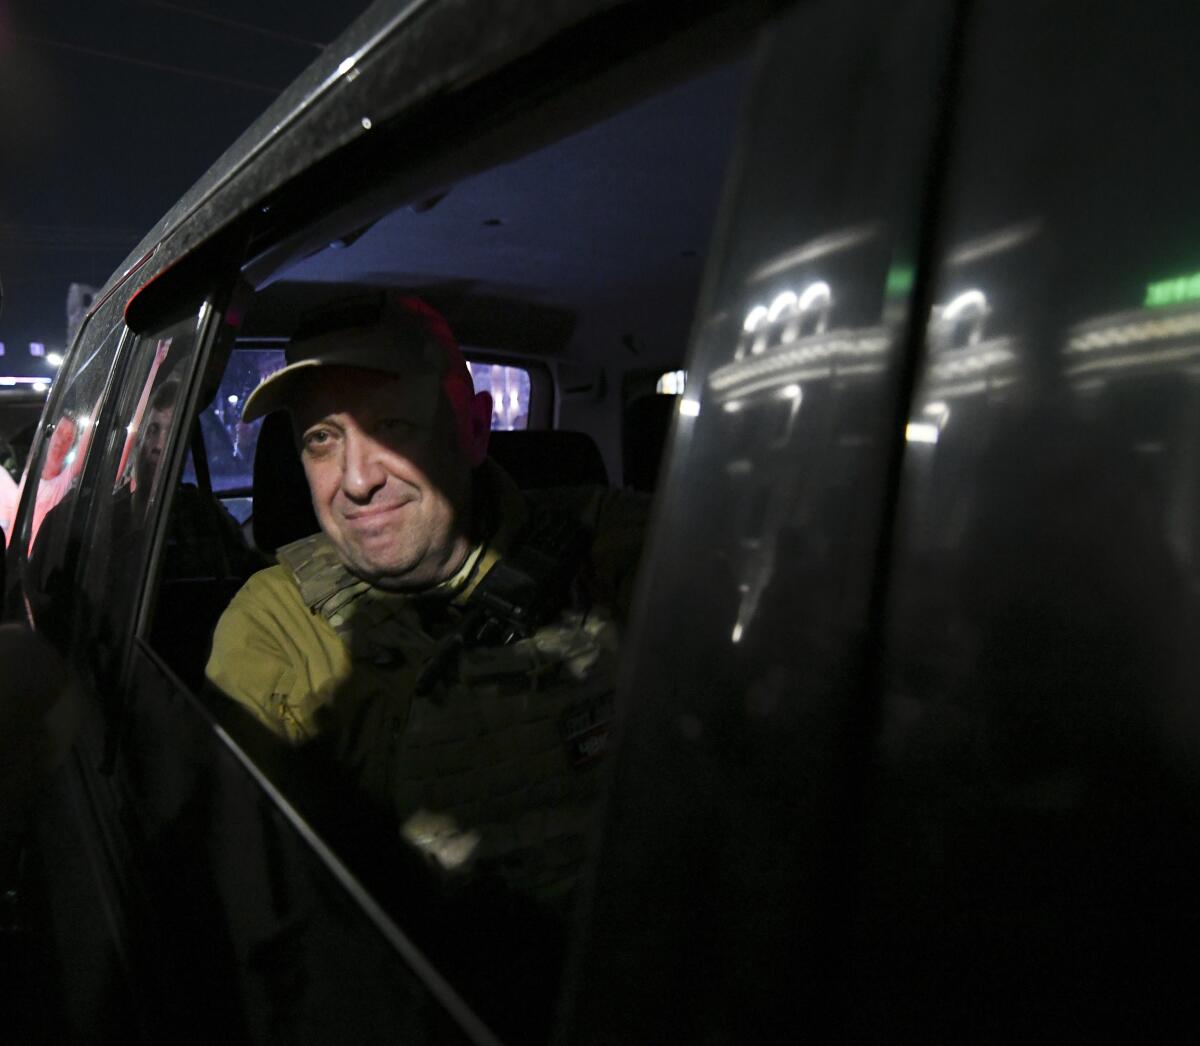 A man wearing a cap and olive-green clothing looks out the window of a vehicle 